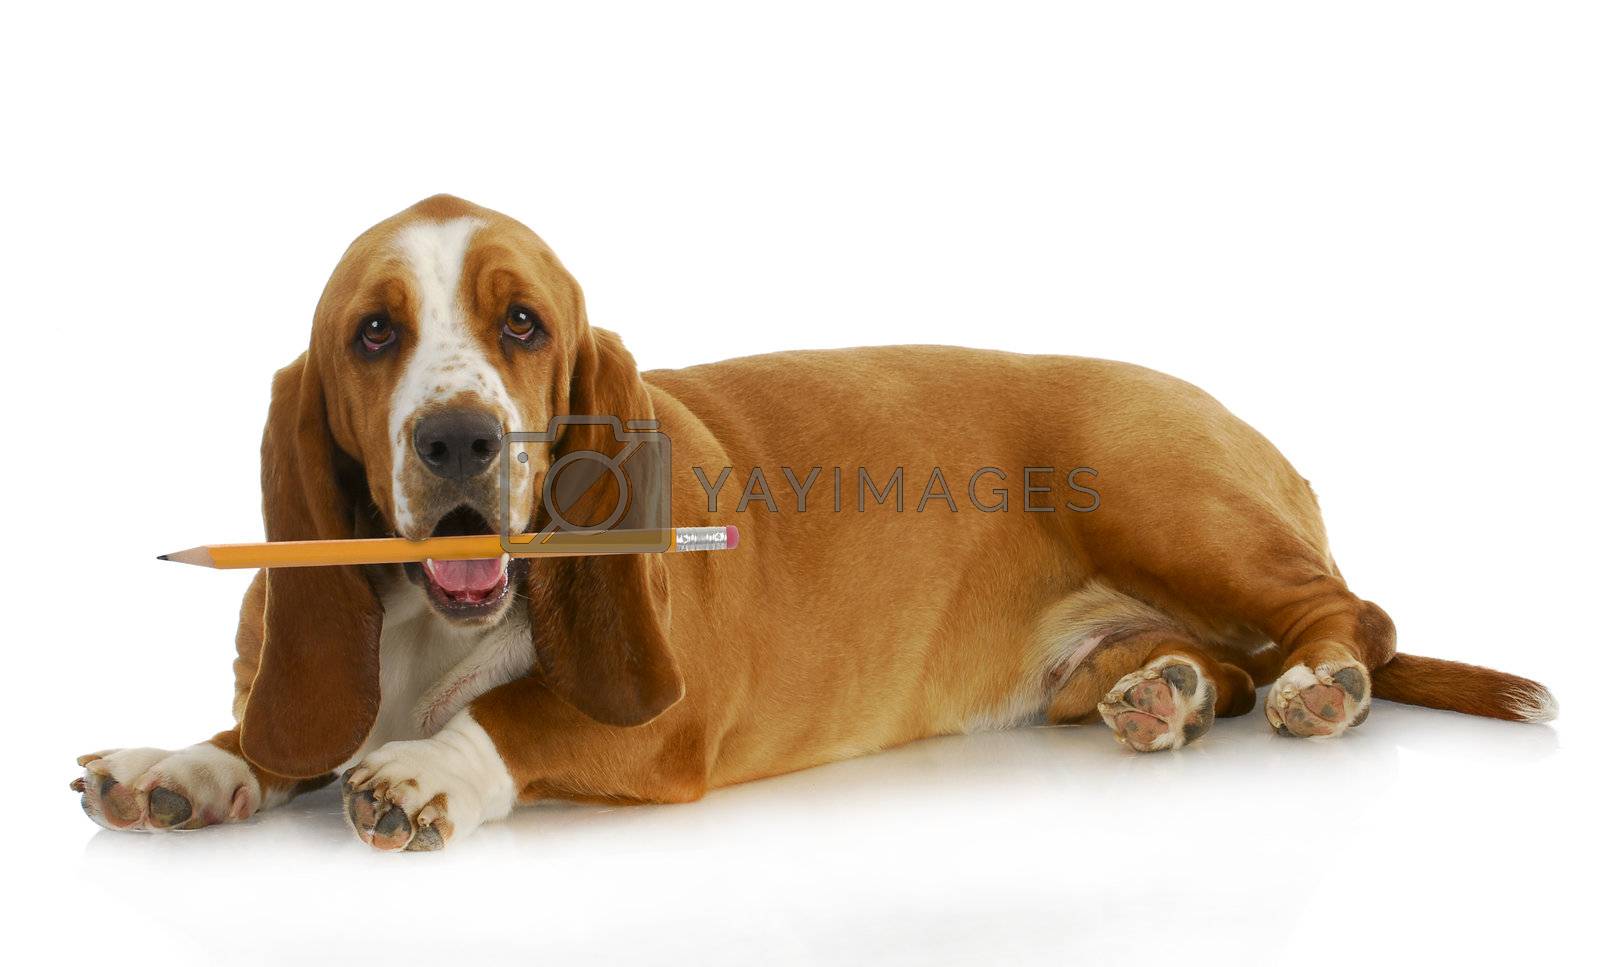 Royalty free image of dog holding pencil by willeecole123